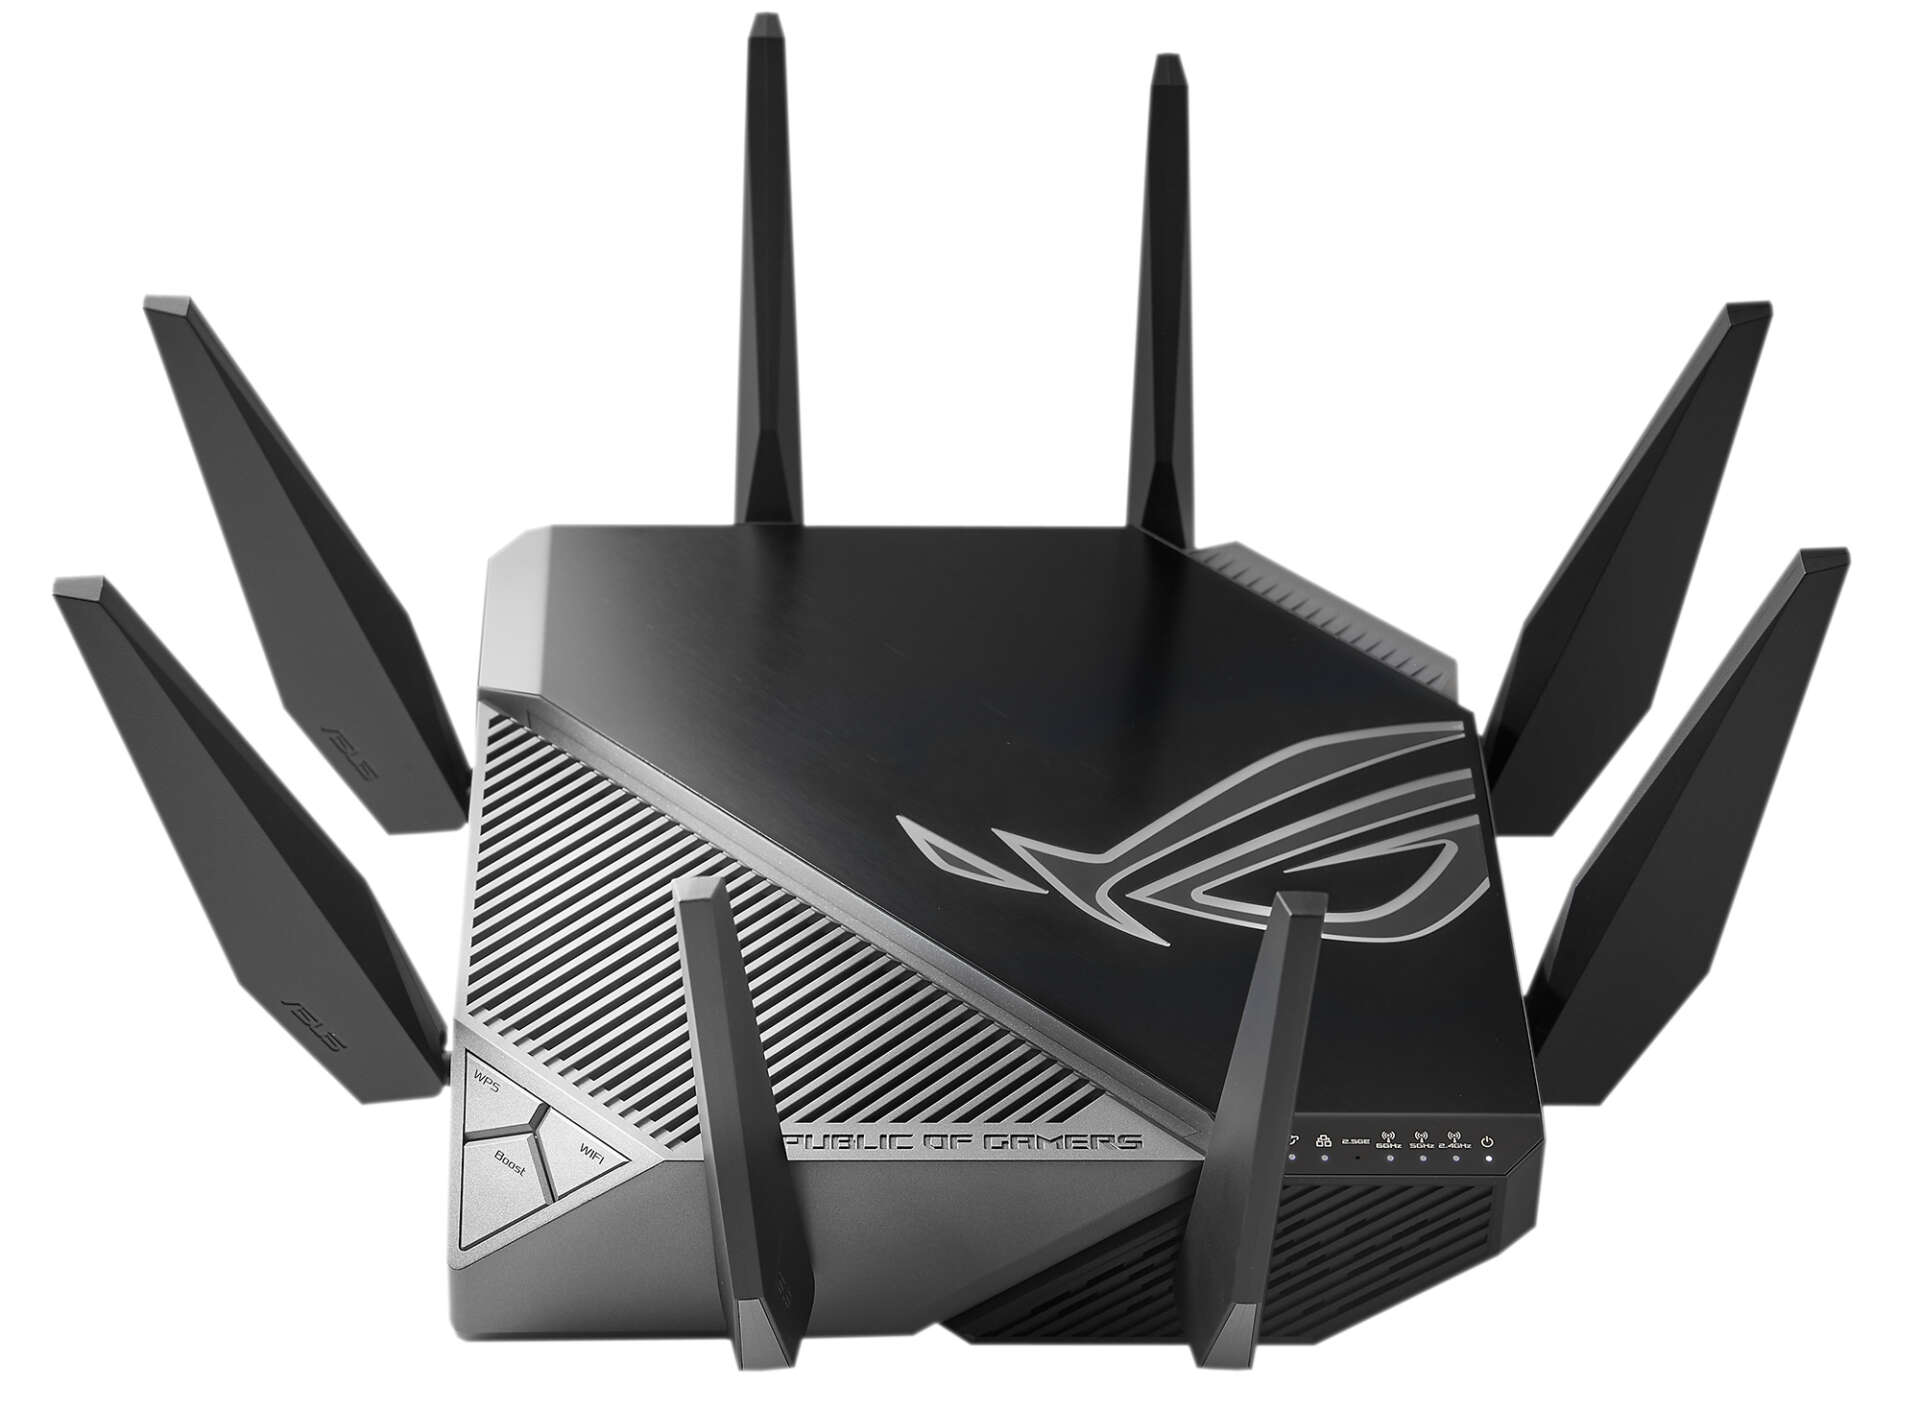 Asus rog rapture gt-axe11000 wireless router tri band ax11000 1xw...